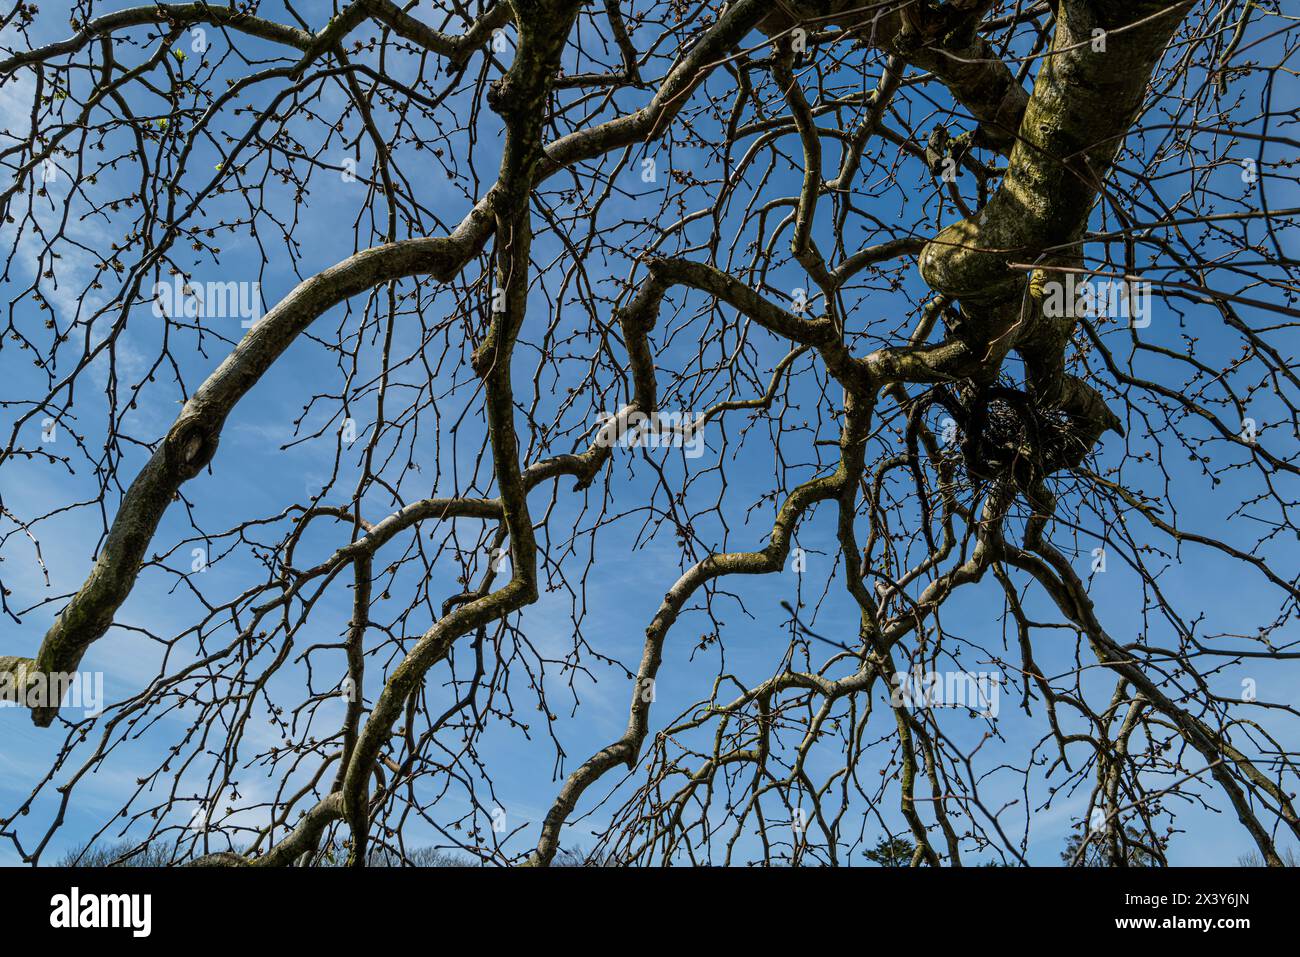 The leafless drooping branches of Ulmus glabra ‘Camperdownii’ Weeping Wych Elm in Trenance Gardens in Newquay in Cornwall in the UK. Stock Photo